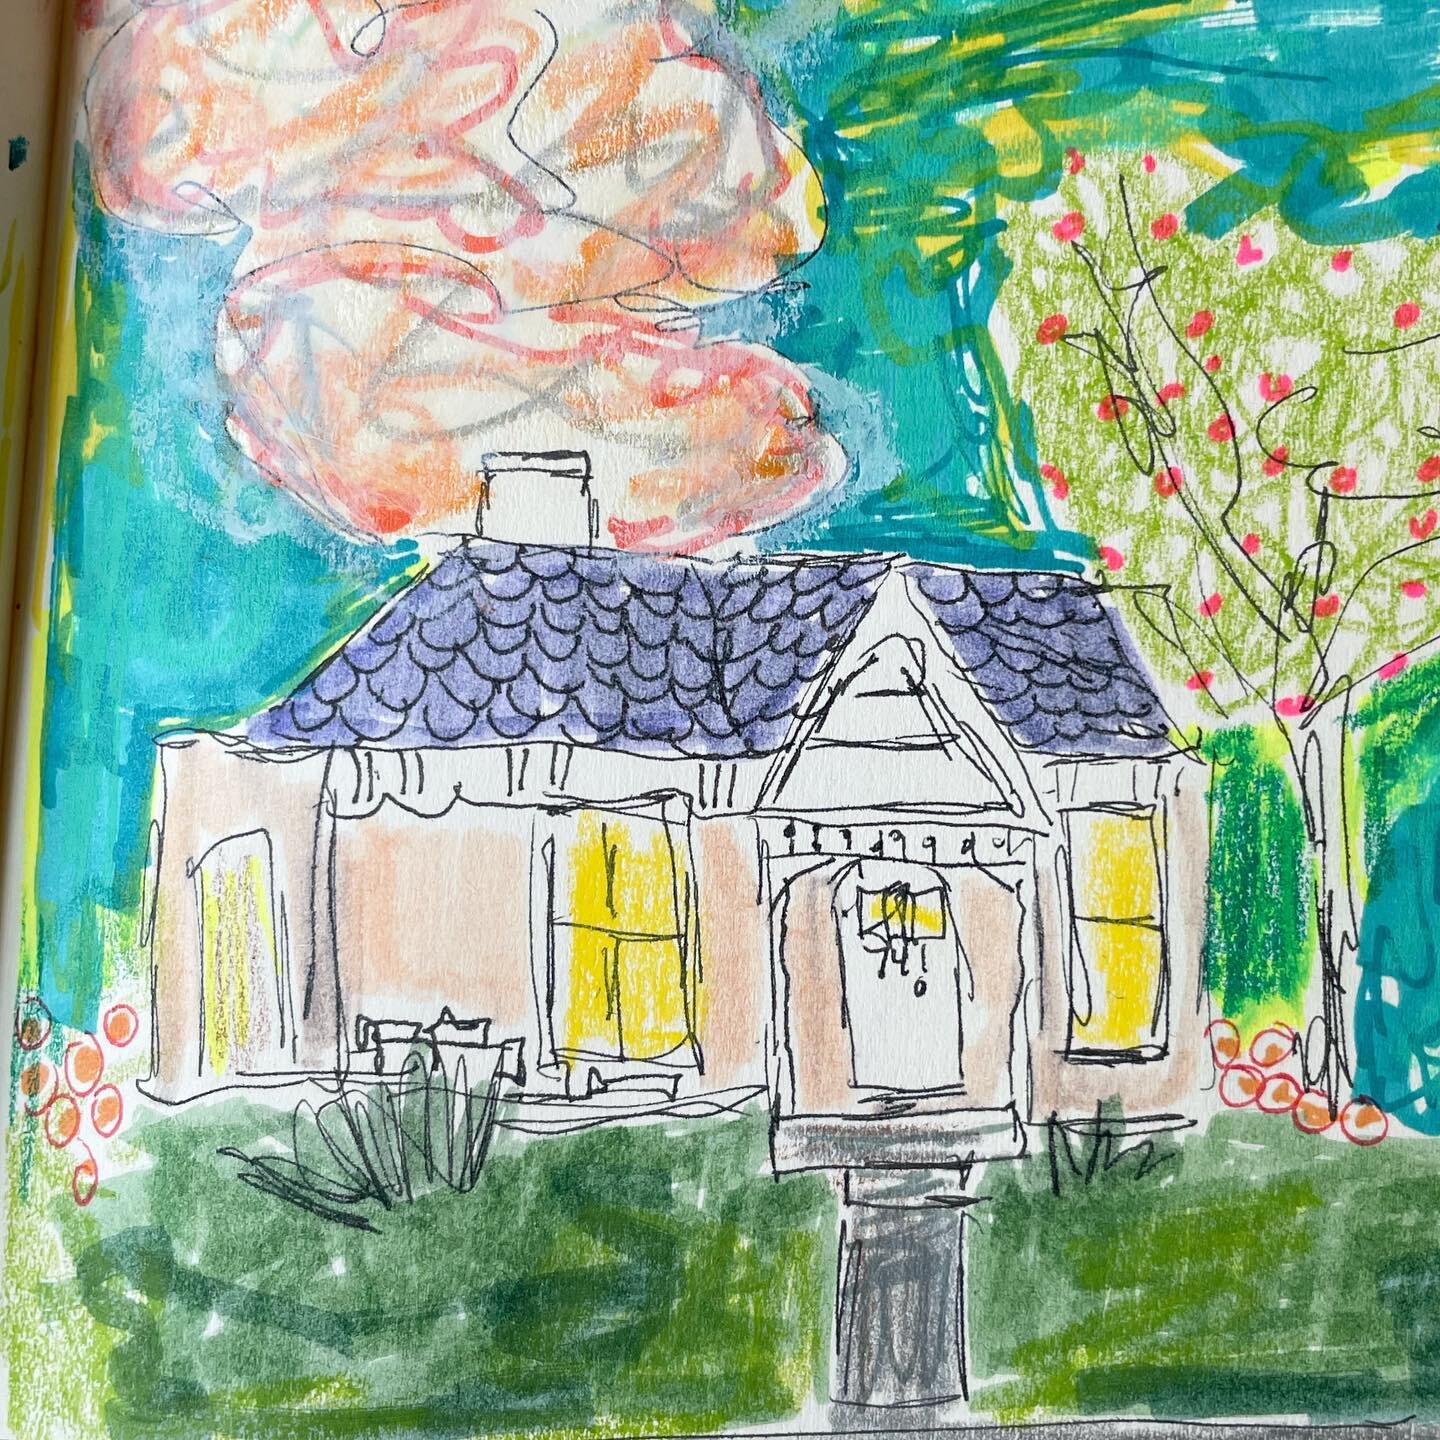 Over the weekend, I visited my sister and was reminded how much I ❤️ the little cottages in Salida.  Warm glowing windows and color theory play was inspired by @emilypowellstudio class.